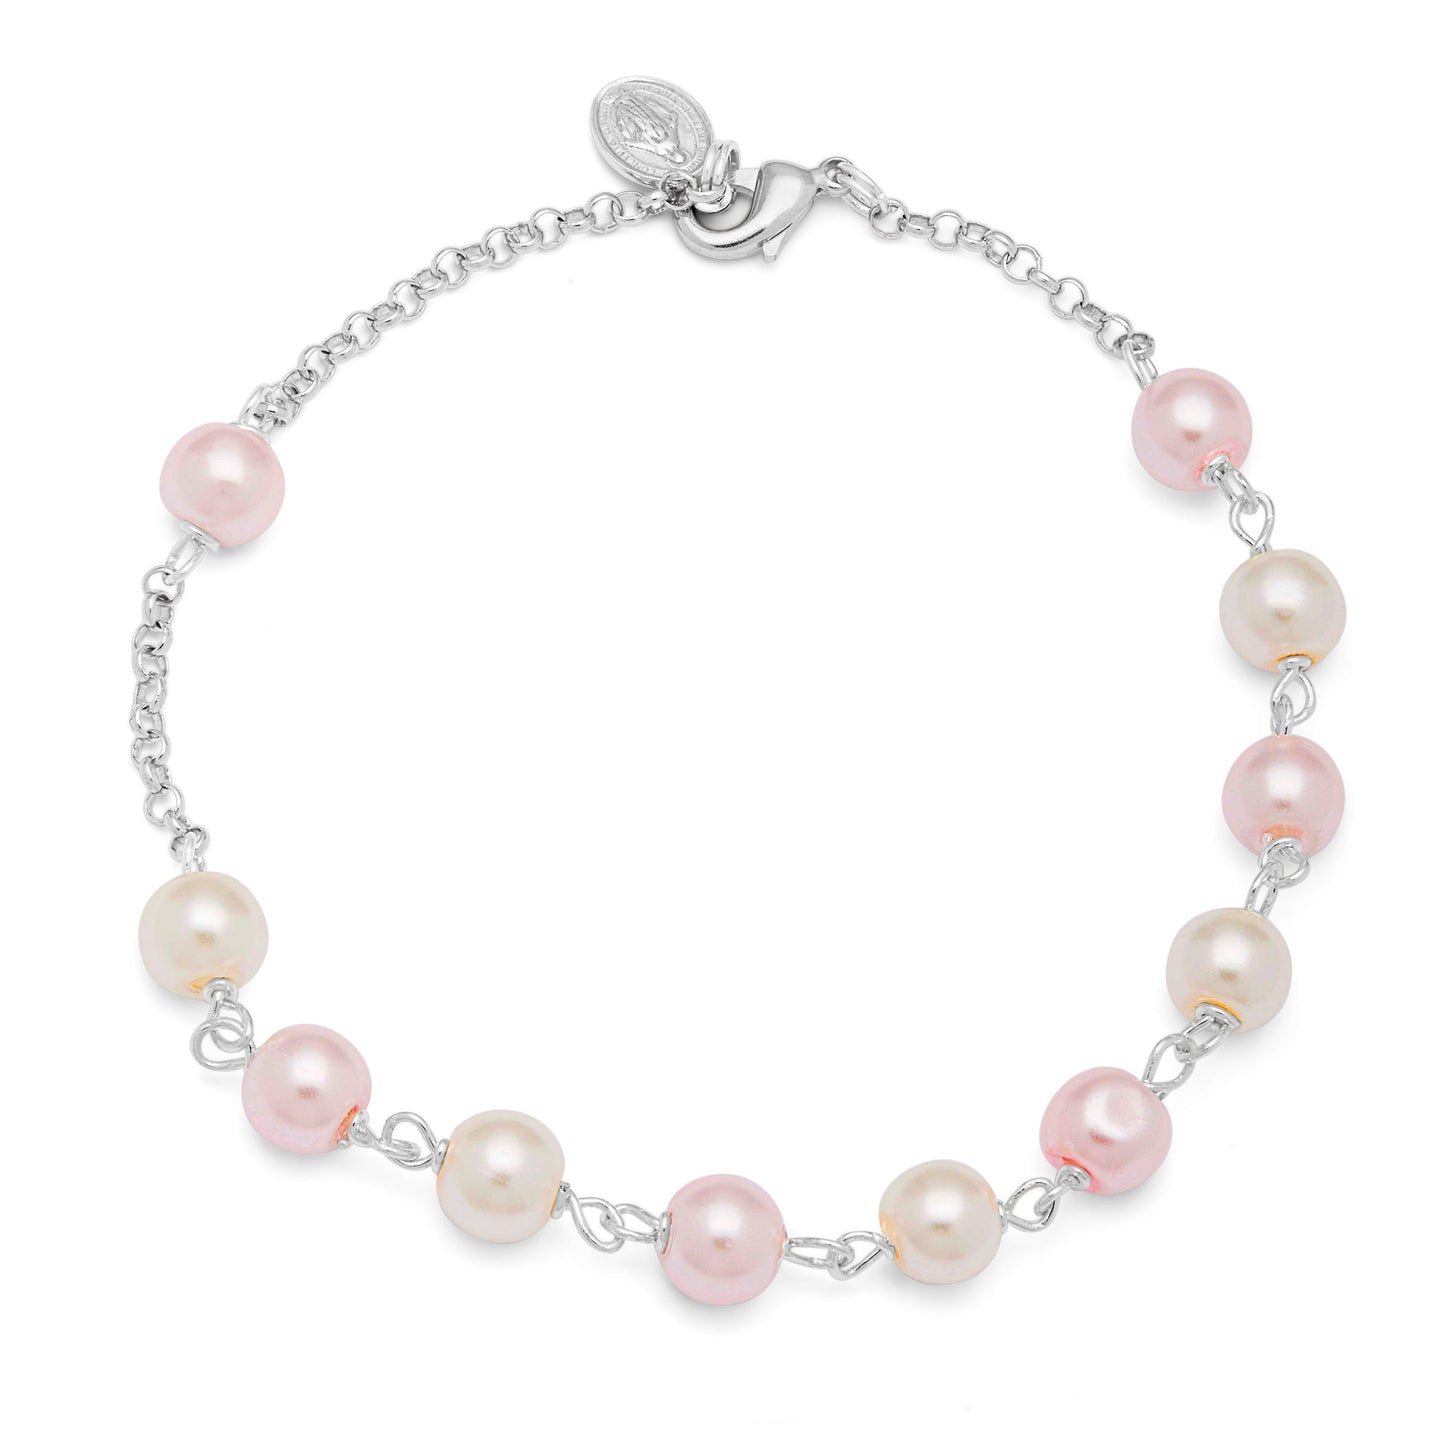 MONDO CATTOLICO Prayer Beads Adjustable Sterling Silver Bracelet Rosary Swarovski Crystal Pearls White and Pink Beads